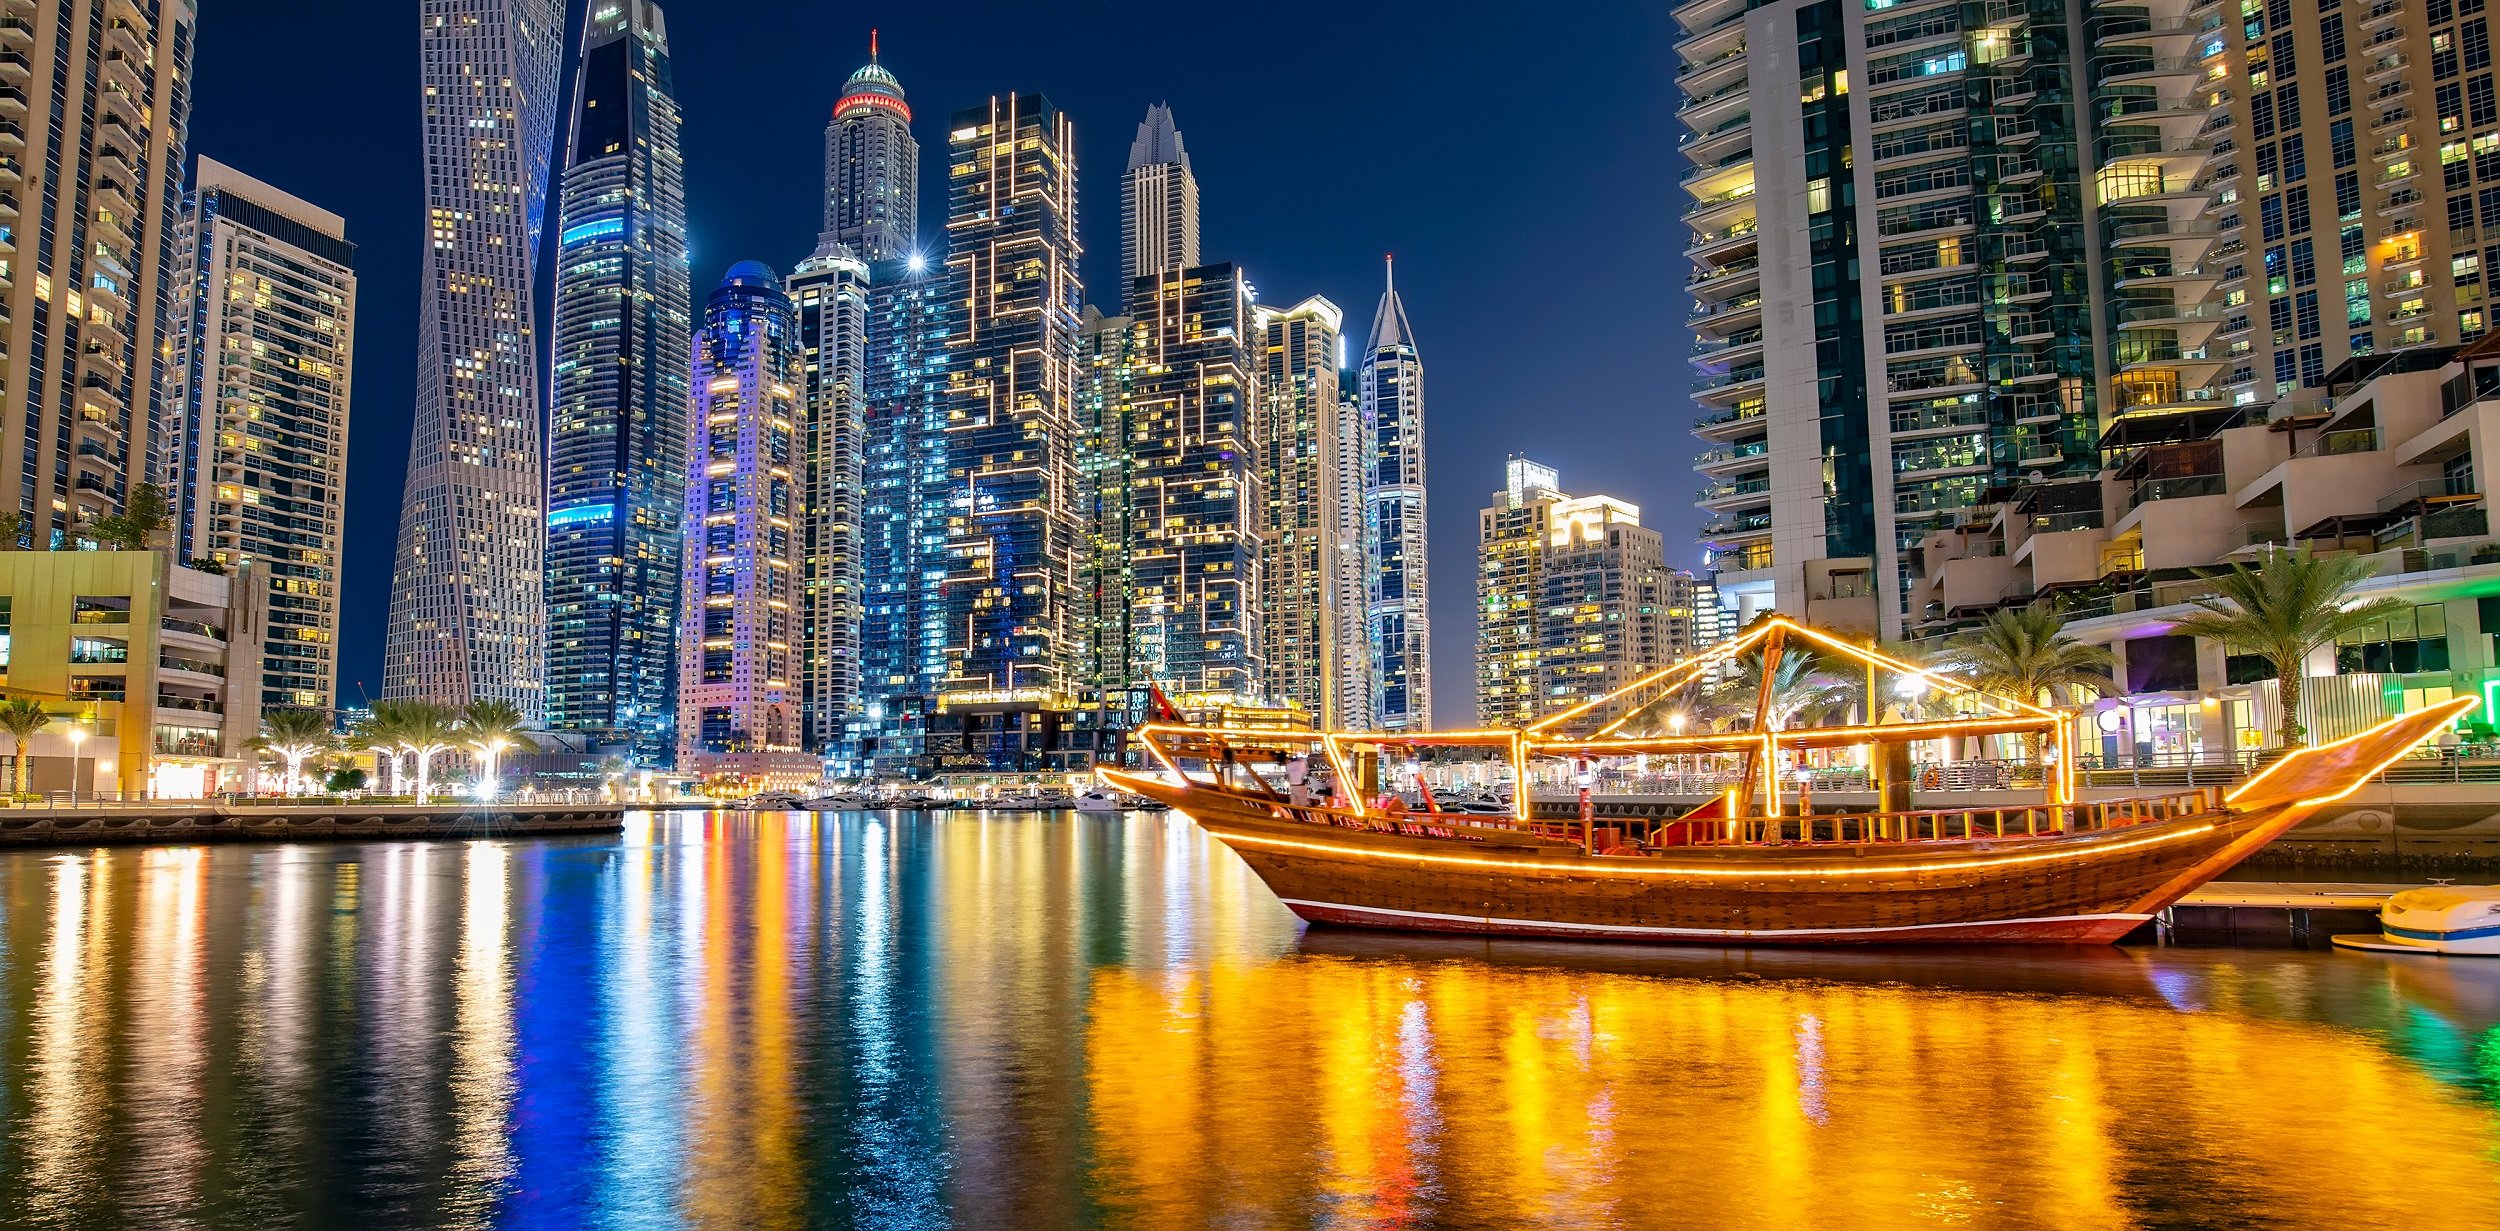 Day 2: Luxury Marina Dhow Cruise with Dinner and Live Entertainment